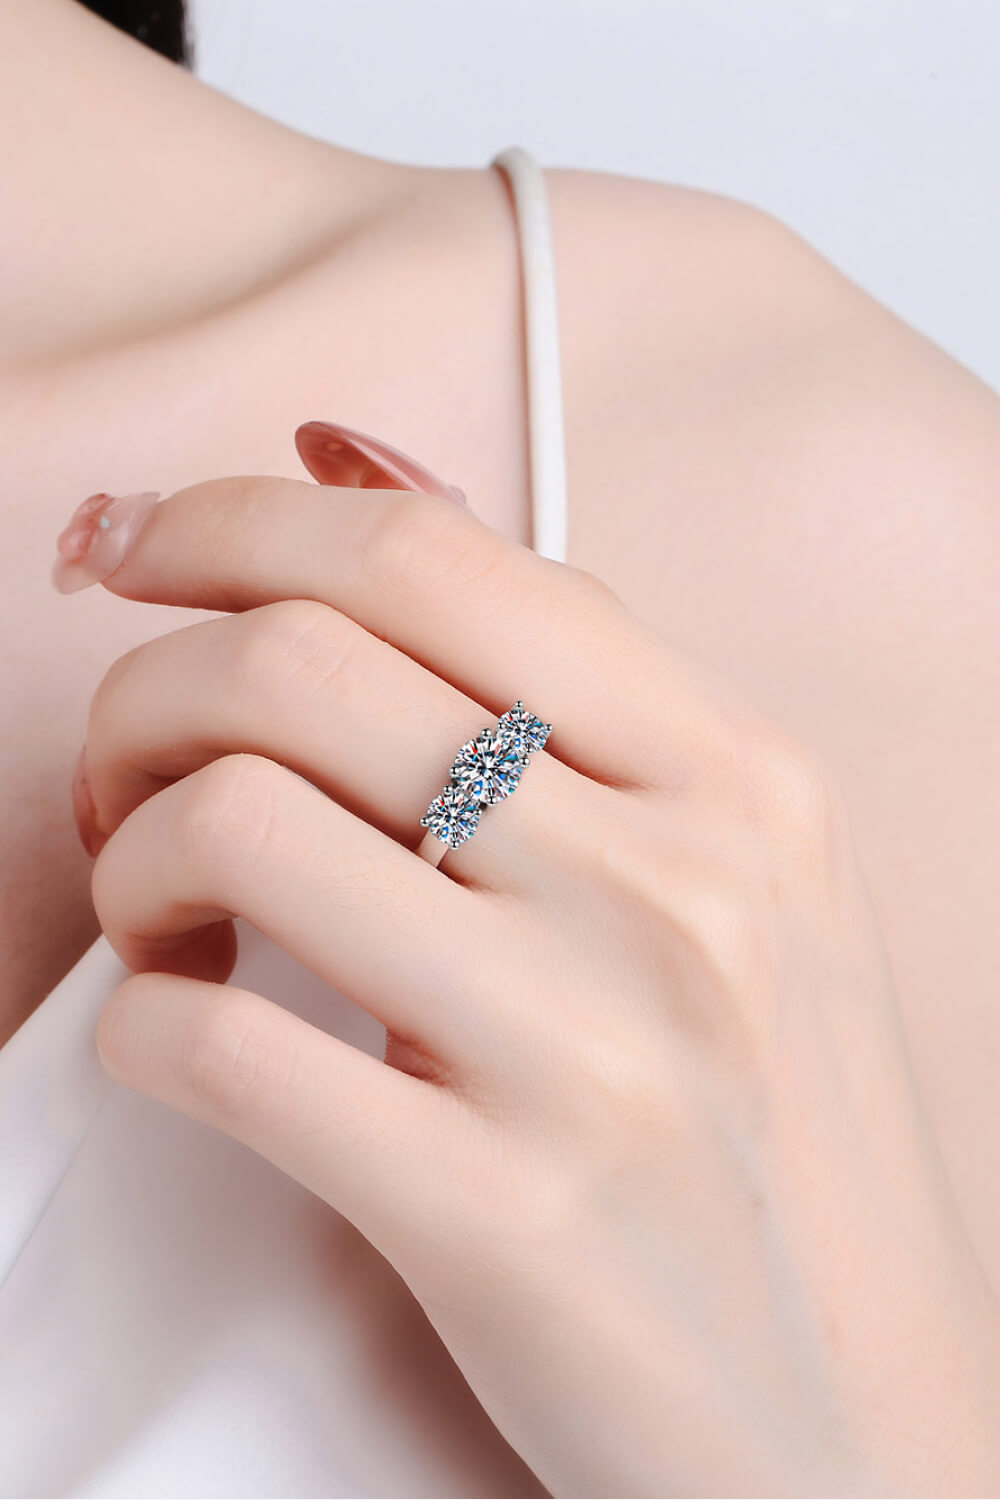 Stylish 925 Sterling Silver Moissanite Ring-Rings-Inspired by Justeen-Women's Clothing Boutique in Chicago, Illinois